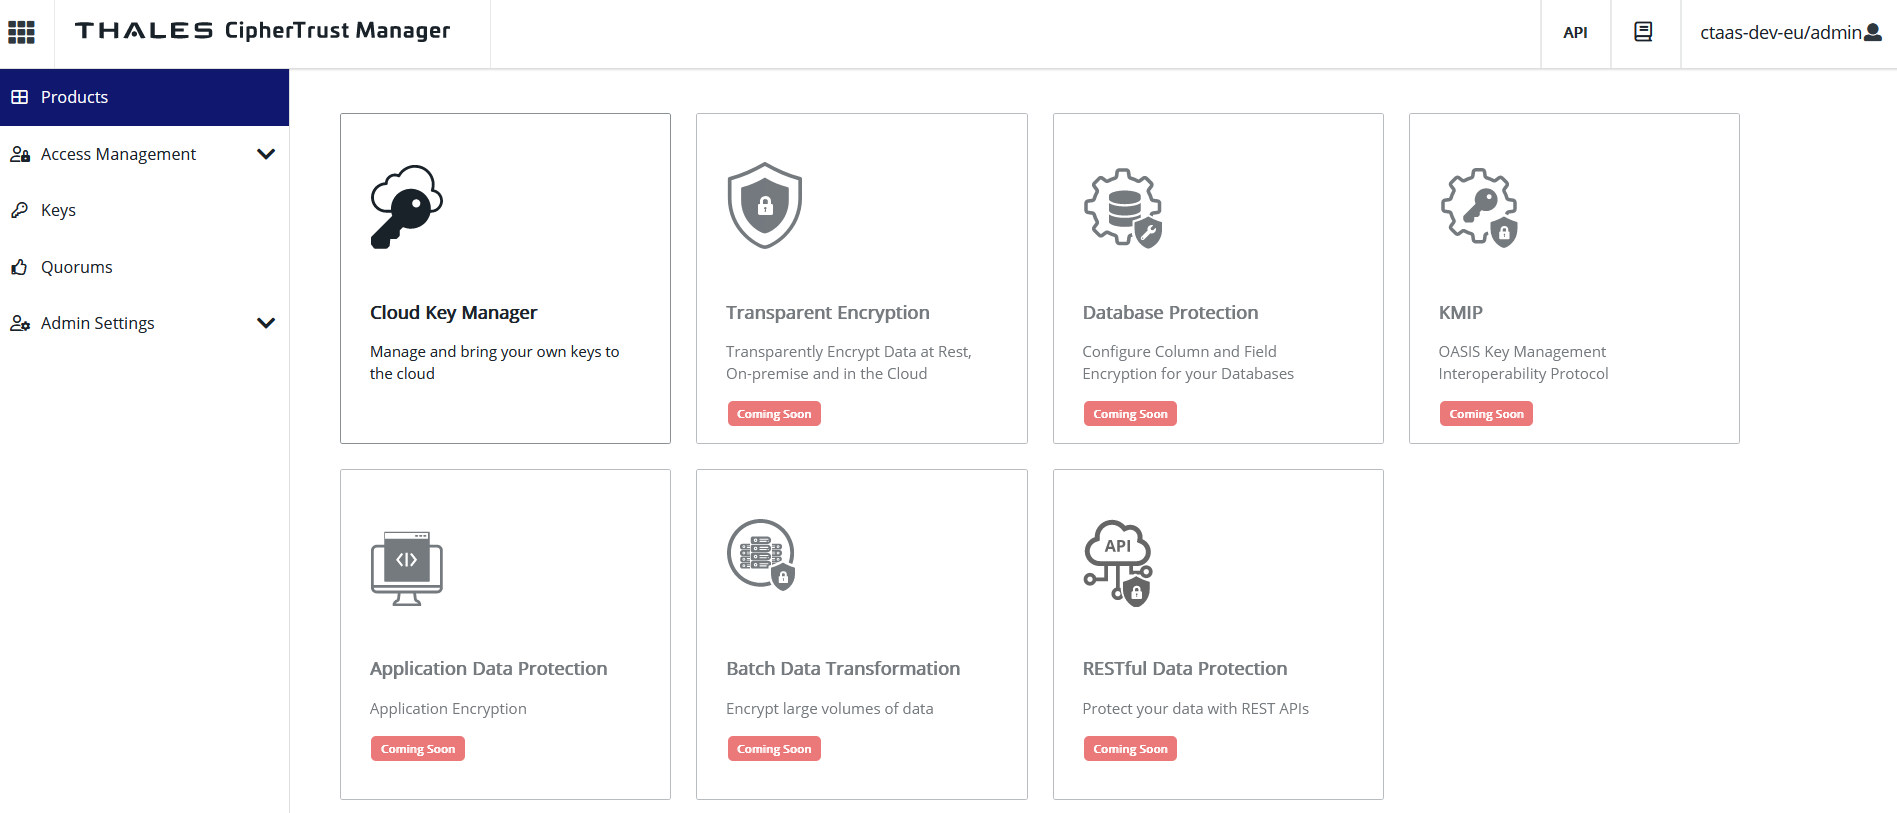 CipherTrust products page, with admin navigation menu on the left and application products in the center